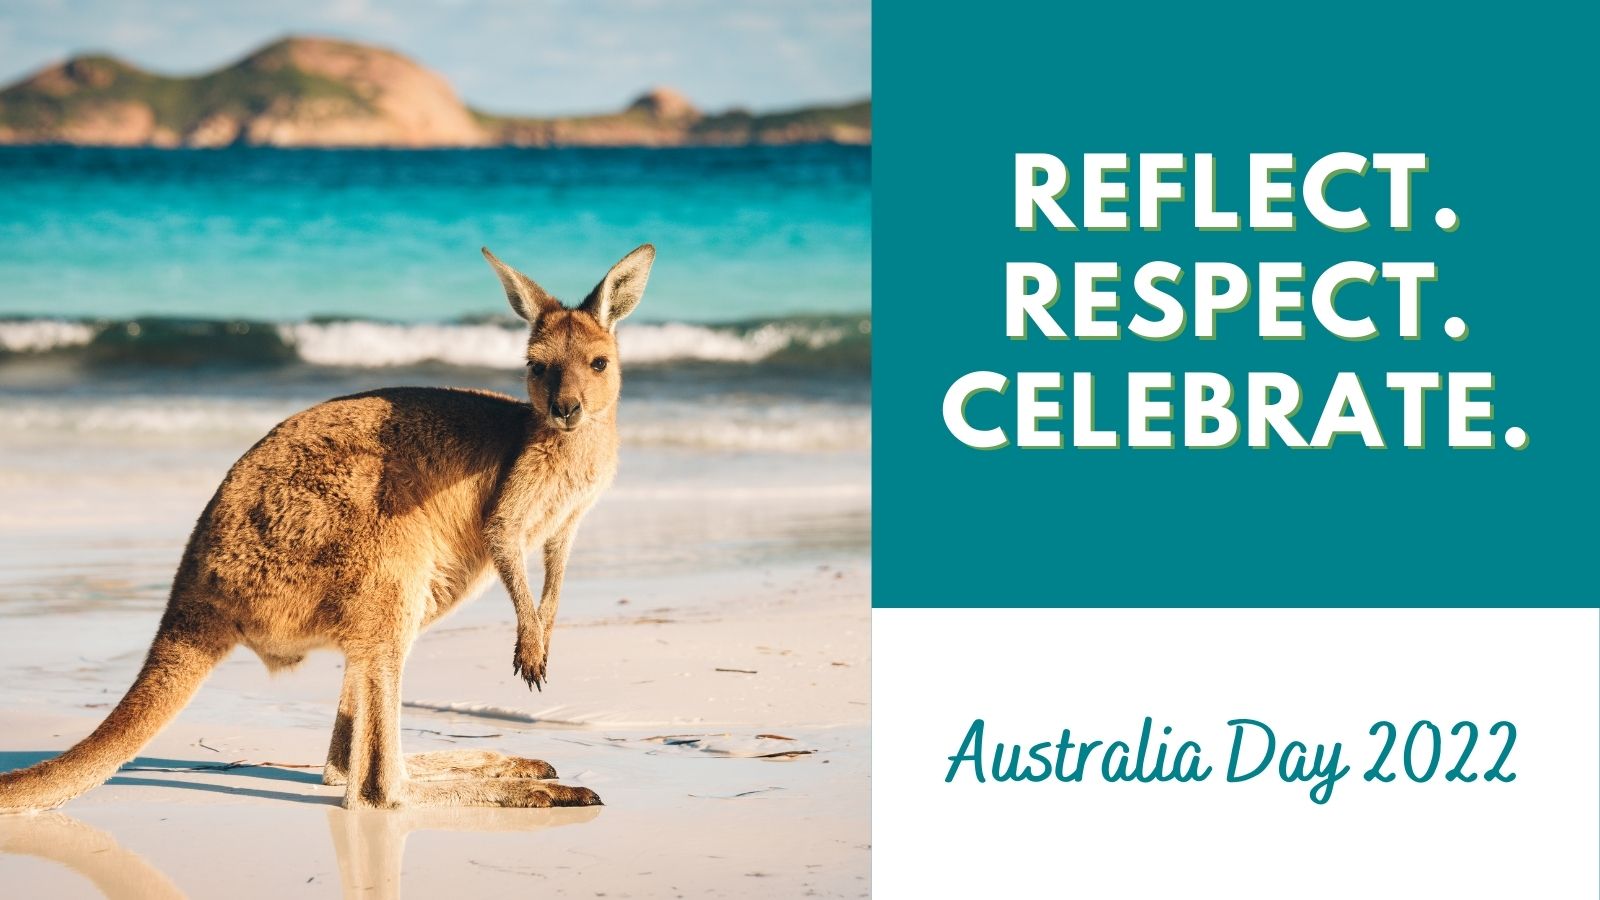 A kangaroo on a beach, with a banner \\\\\\\\\\\\\\\\\'Reflect. Respect. Celebrate"